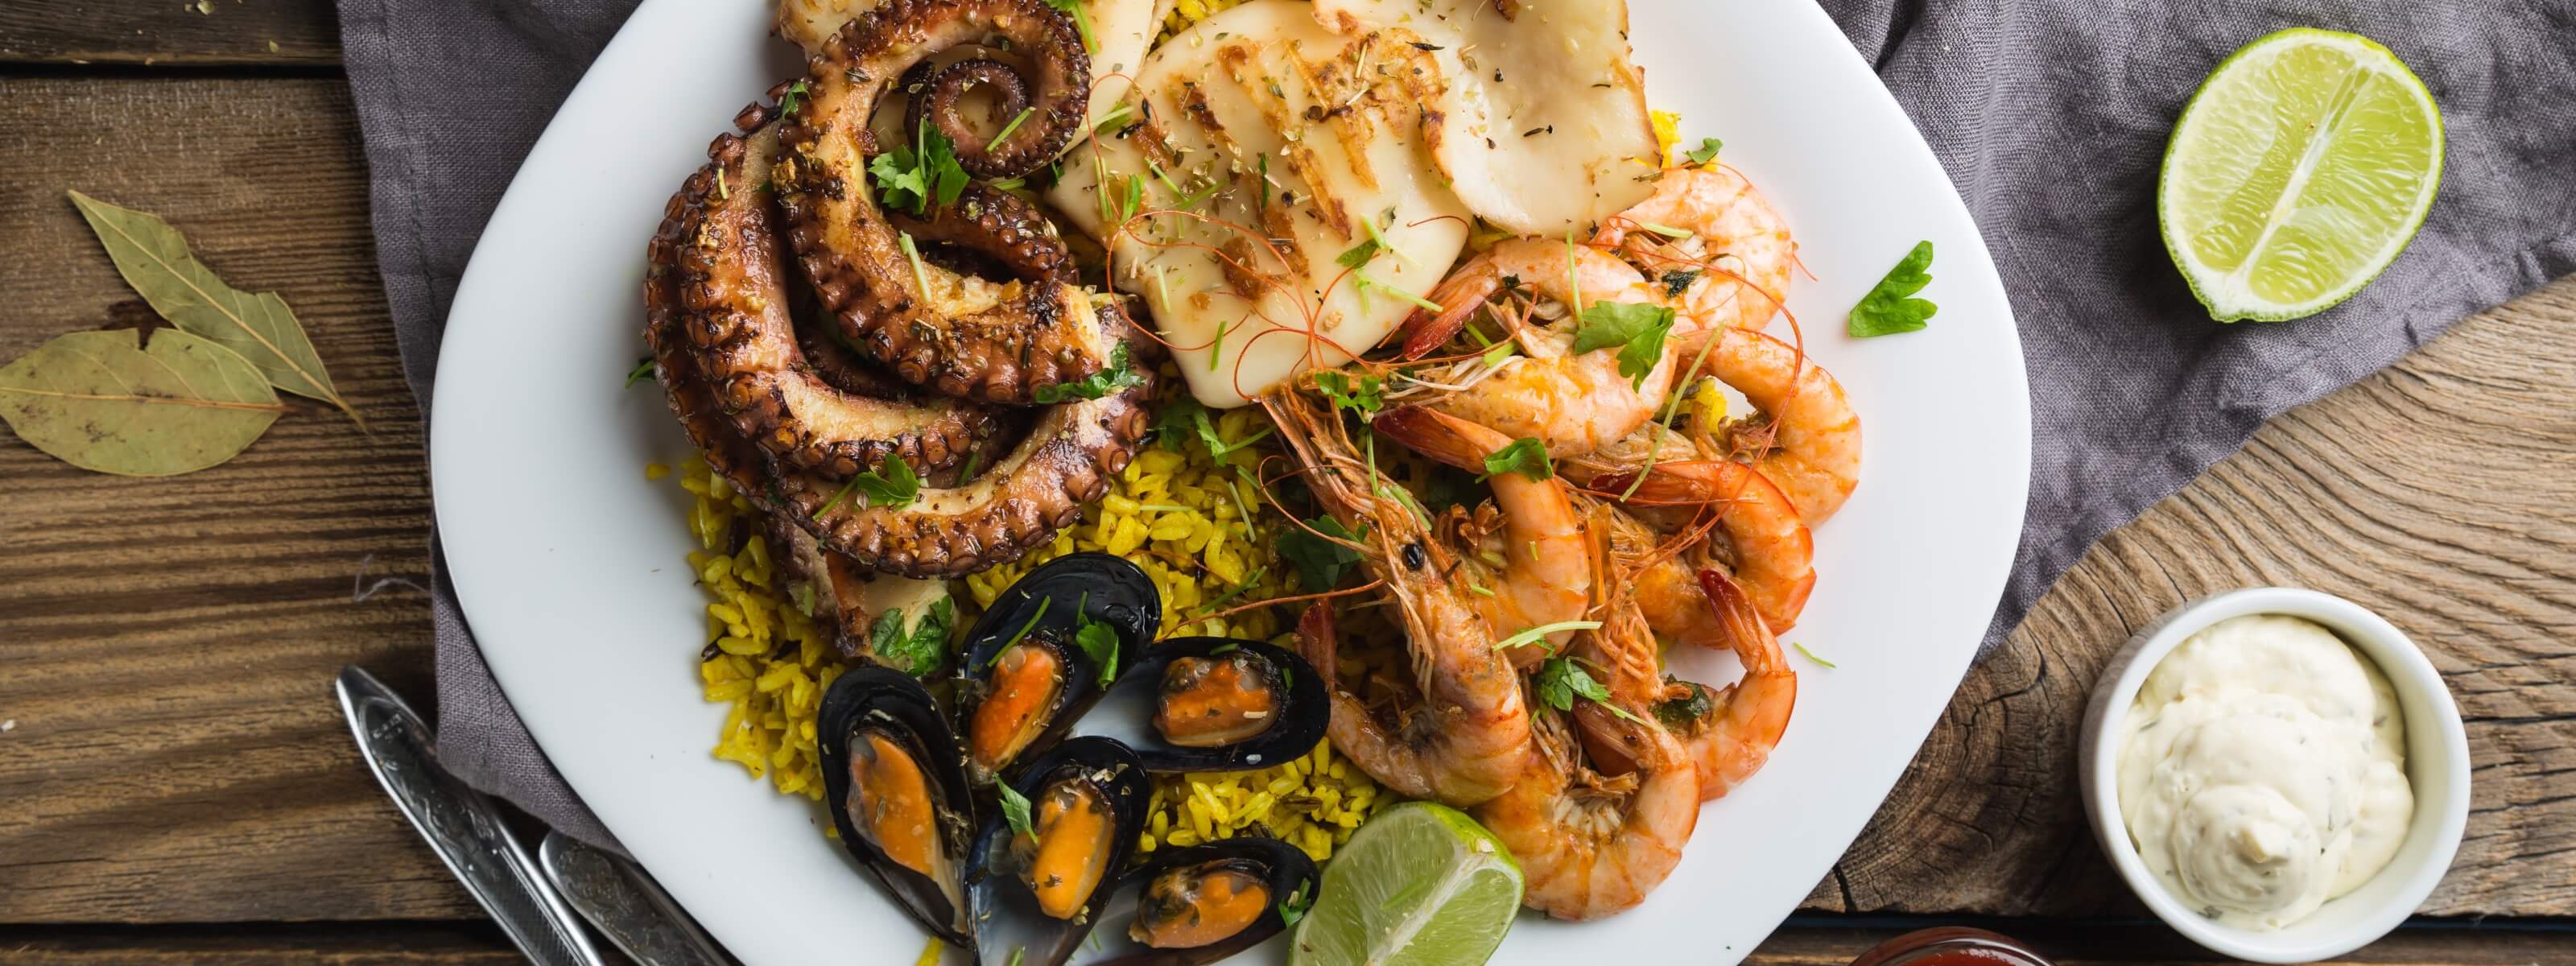 octopus,scallops, squid calamari and more from steve costi seafood